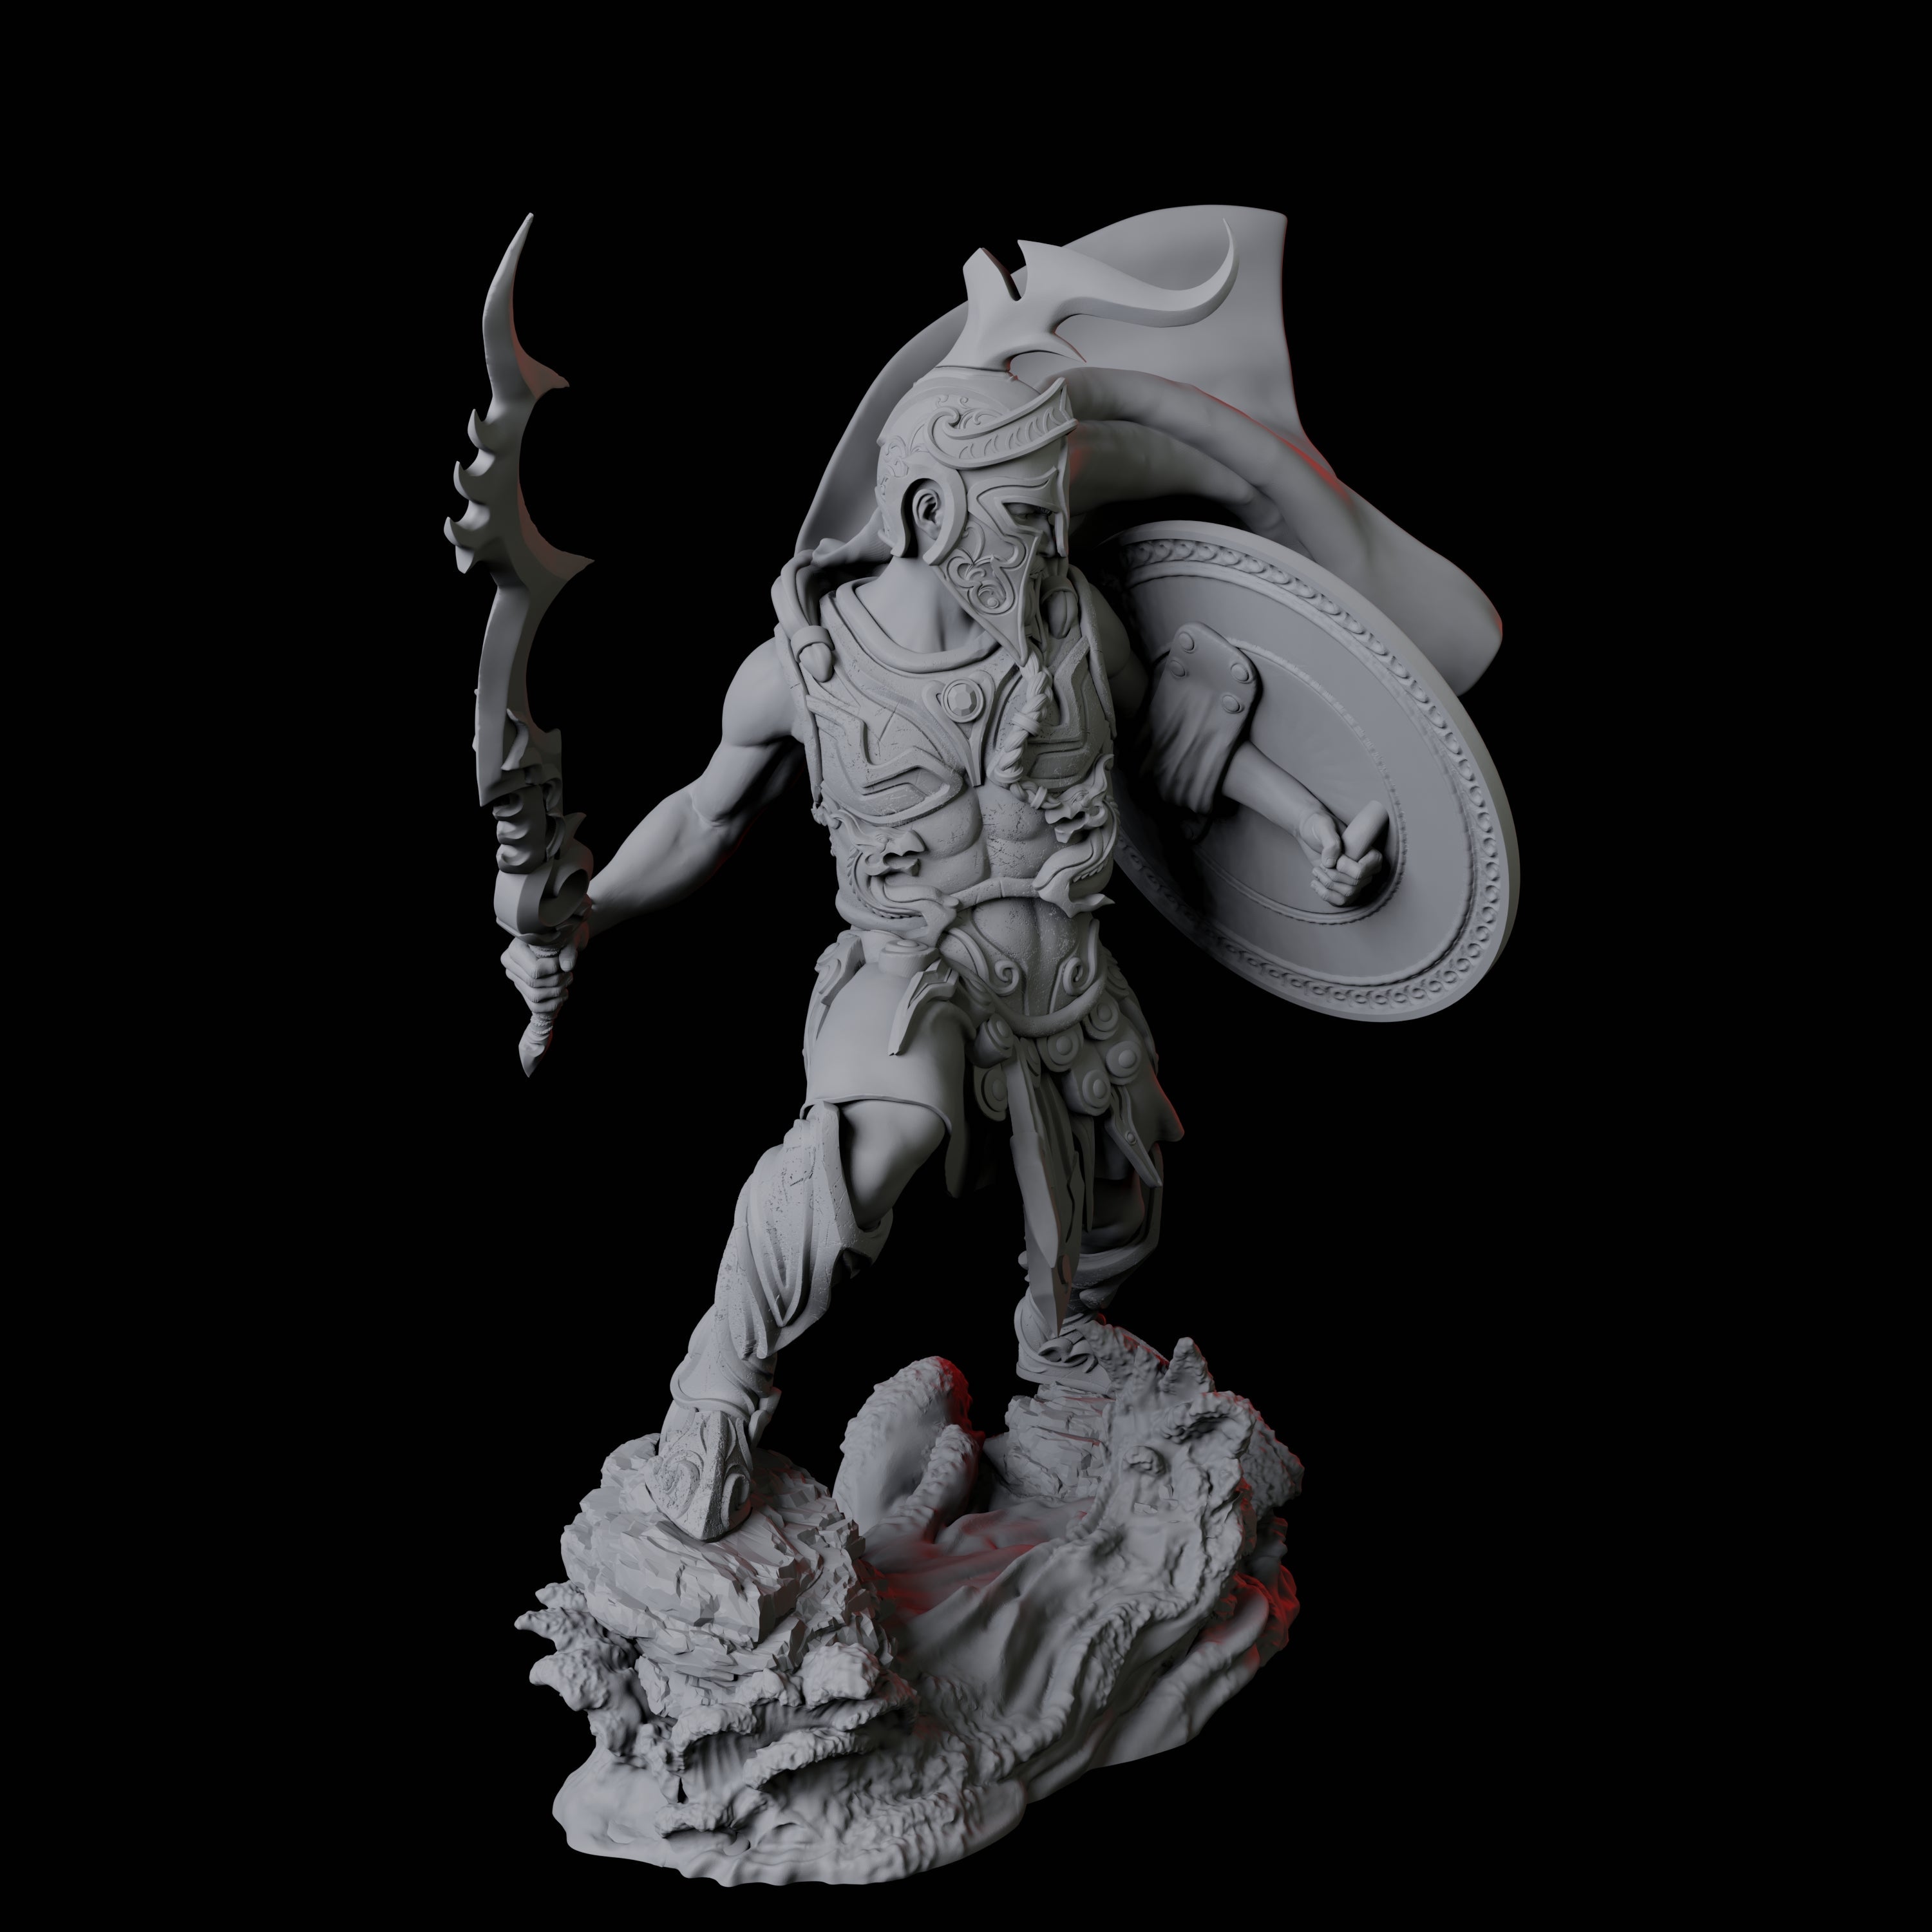 Giant Hoplite B Miniature for Dungeons and Dragons, Pathfinder or other TTRPGs